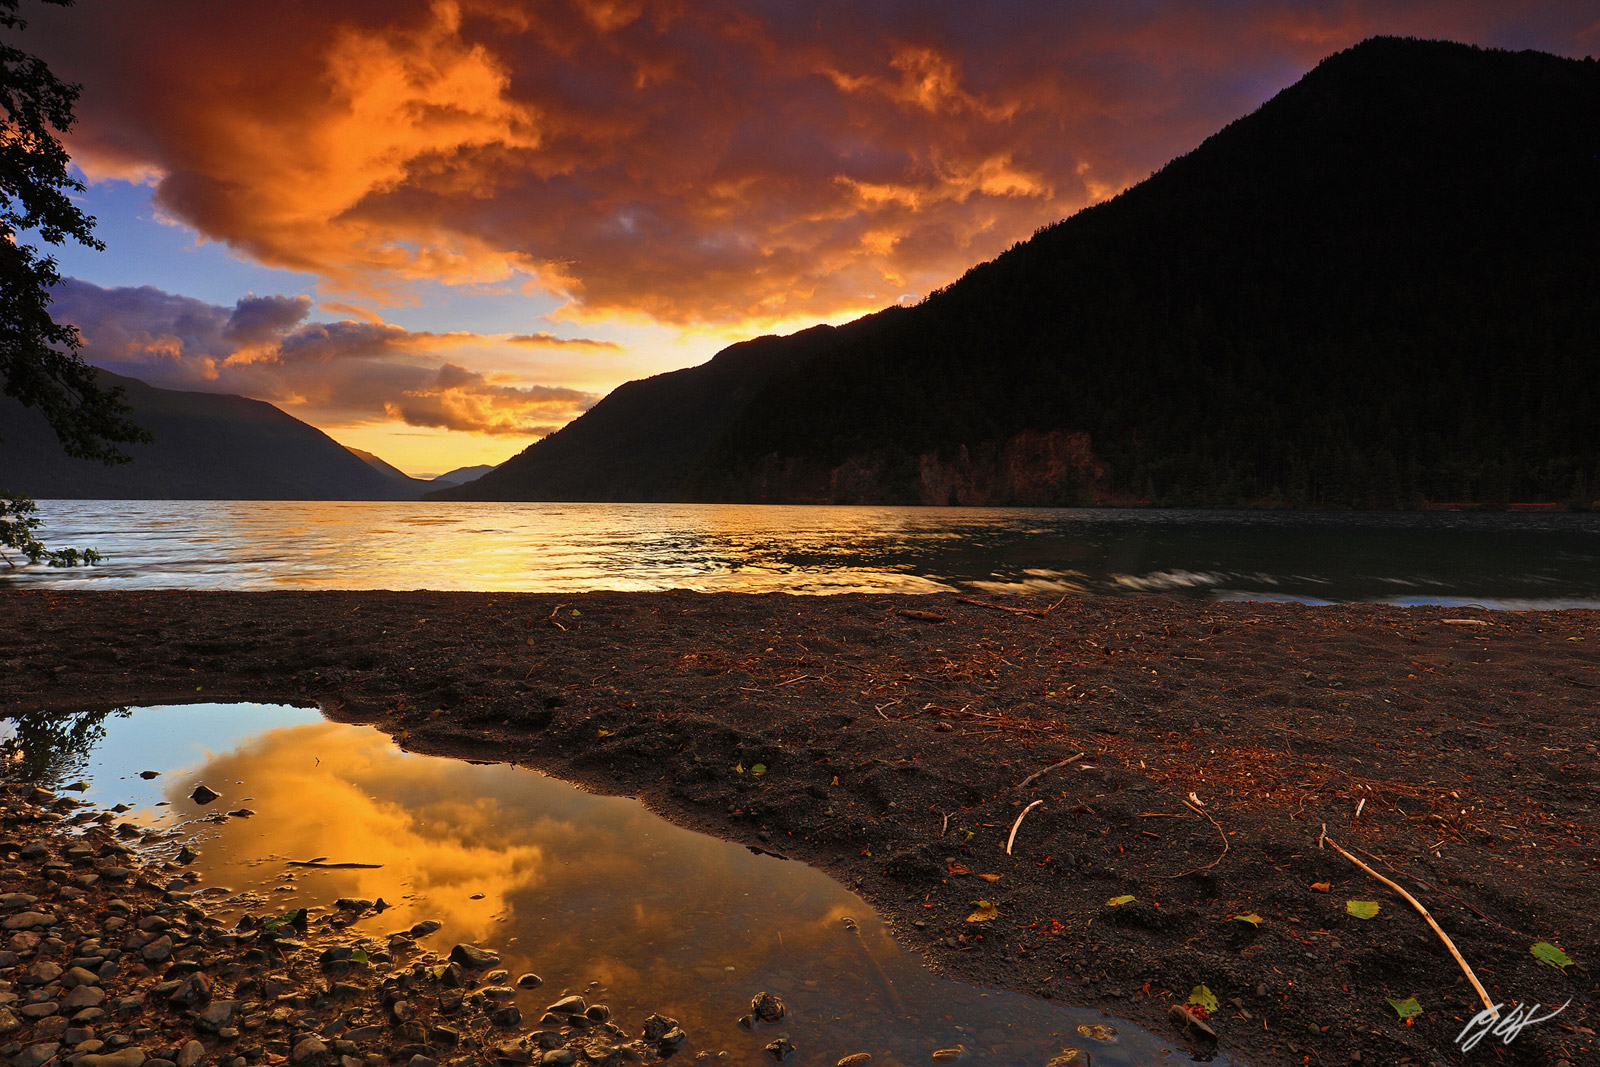 Sunset Reflections from Crescent Lake in Olympic National Park in Washington